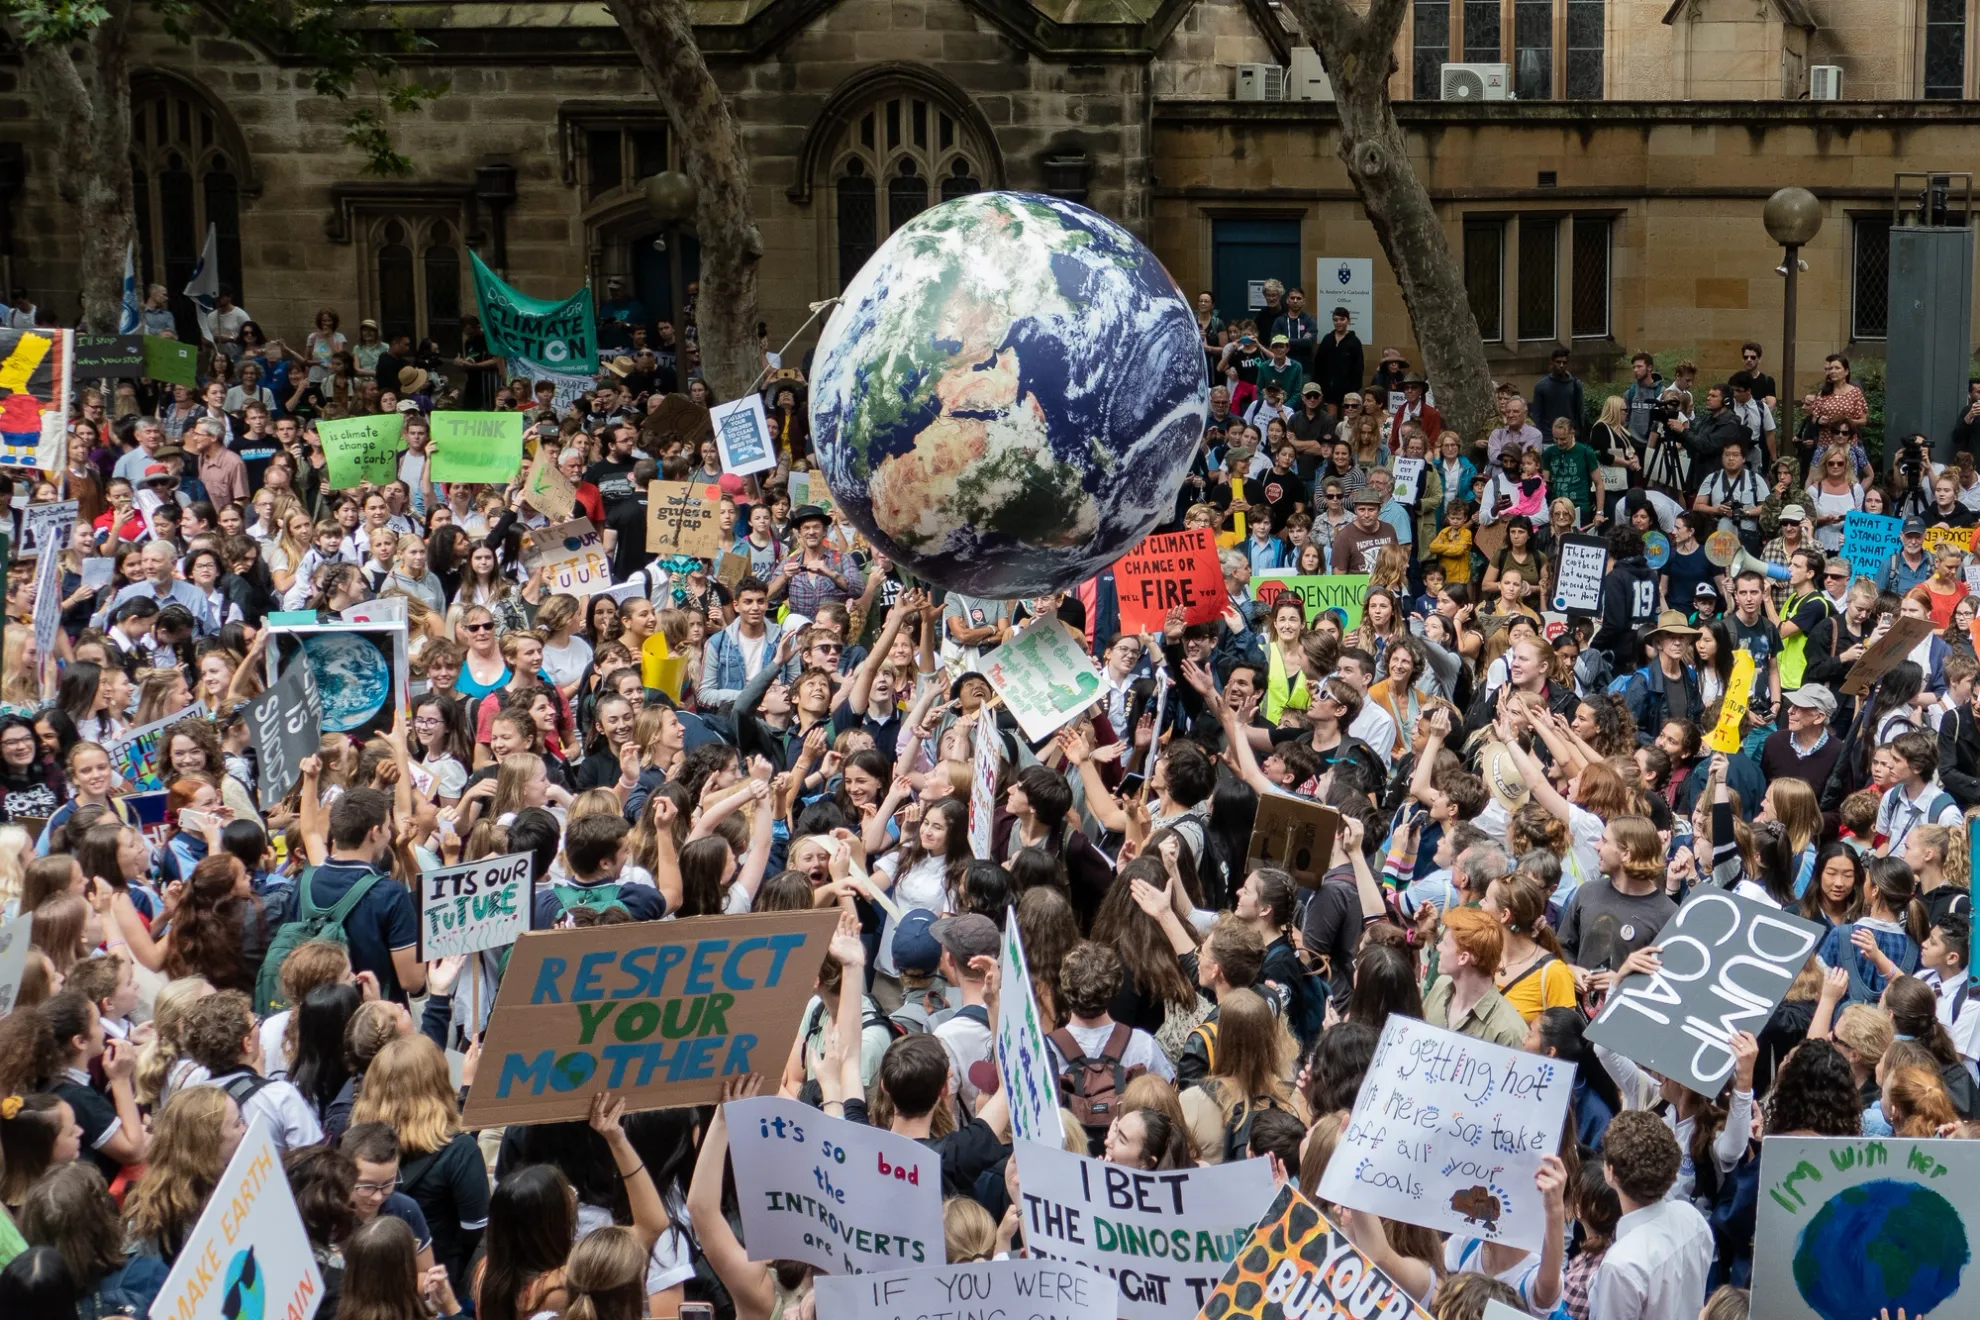 20 000 Australian students gather in climate change protest rally, School Strike 4 Climate, and demand urgent action on climate change